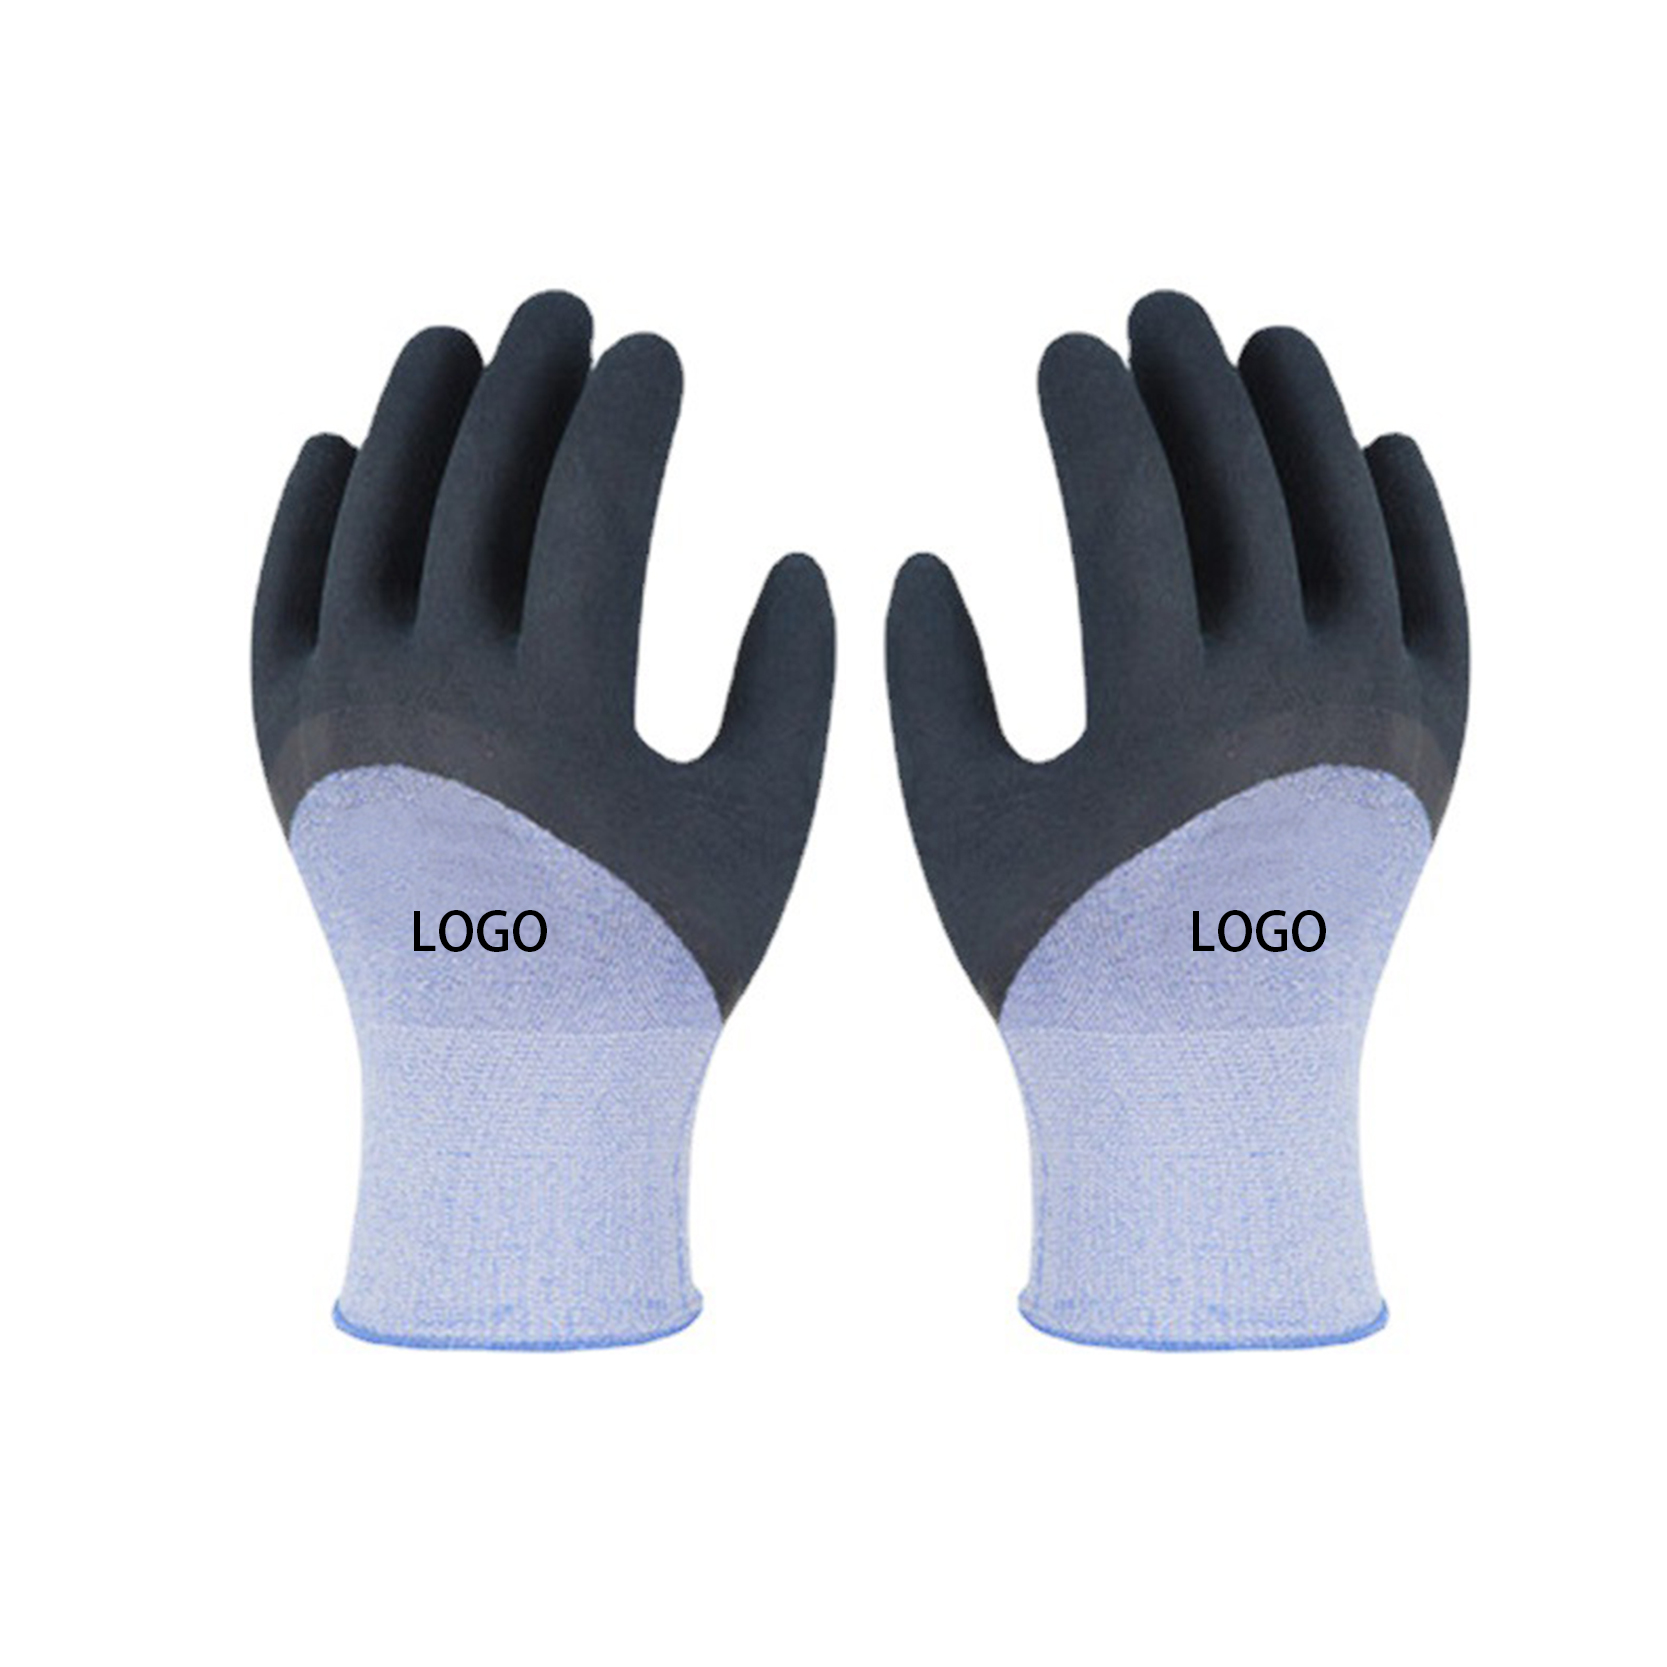 Review: Black Mamba Latex and Nitrile Workshop Gloves | road.cc